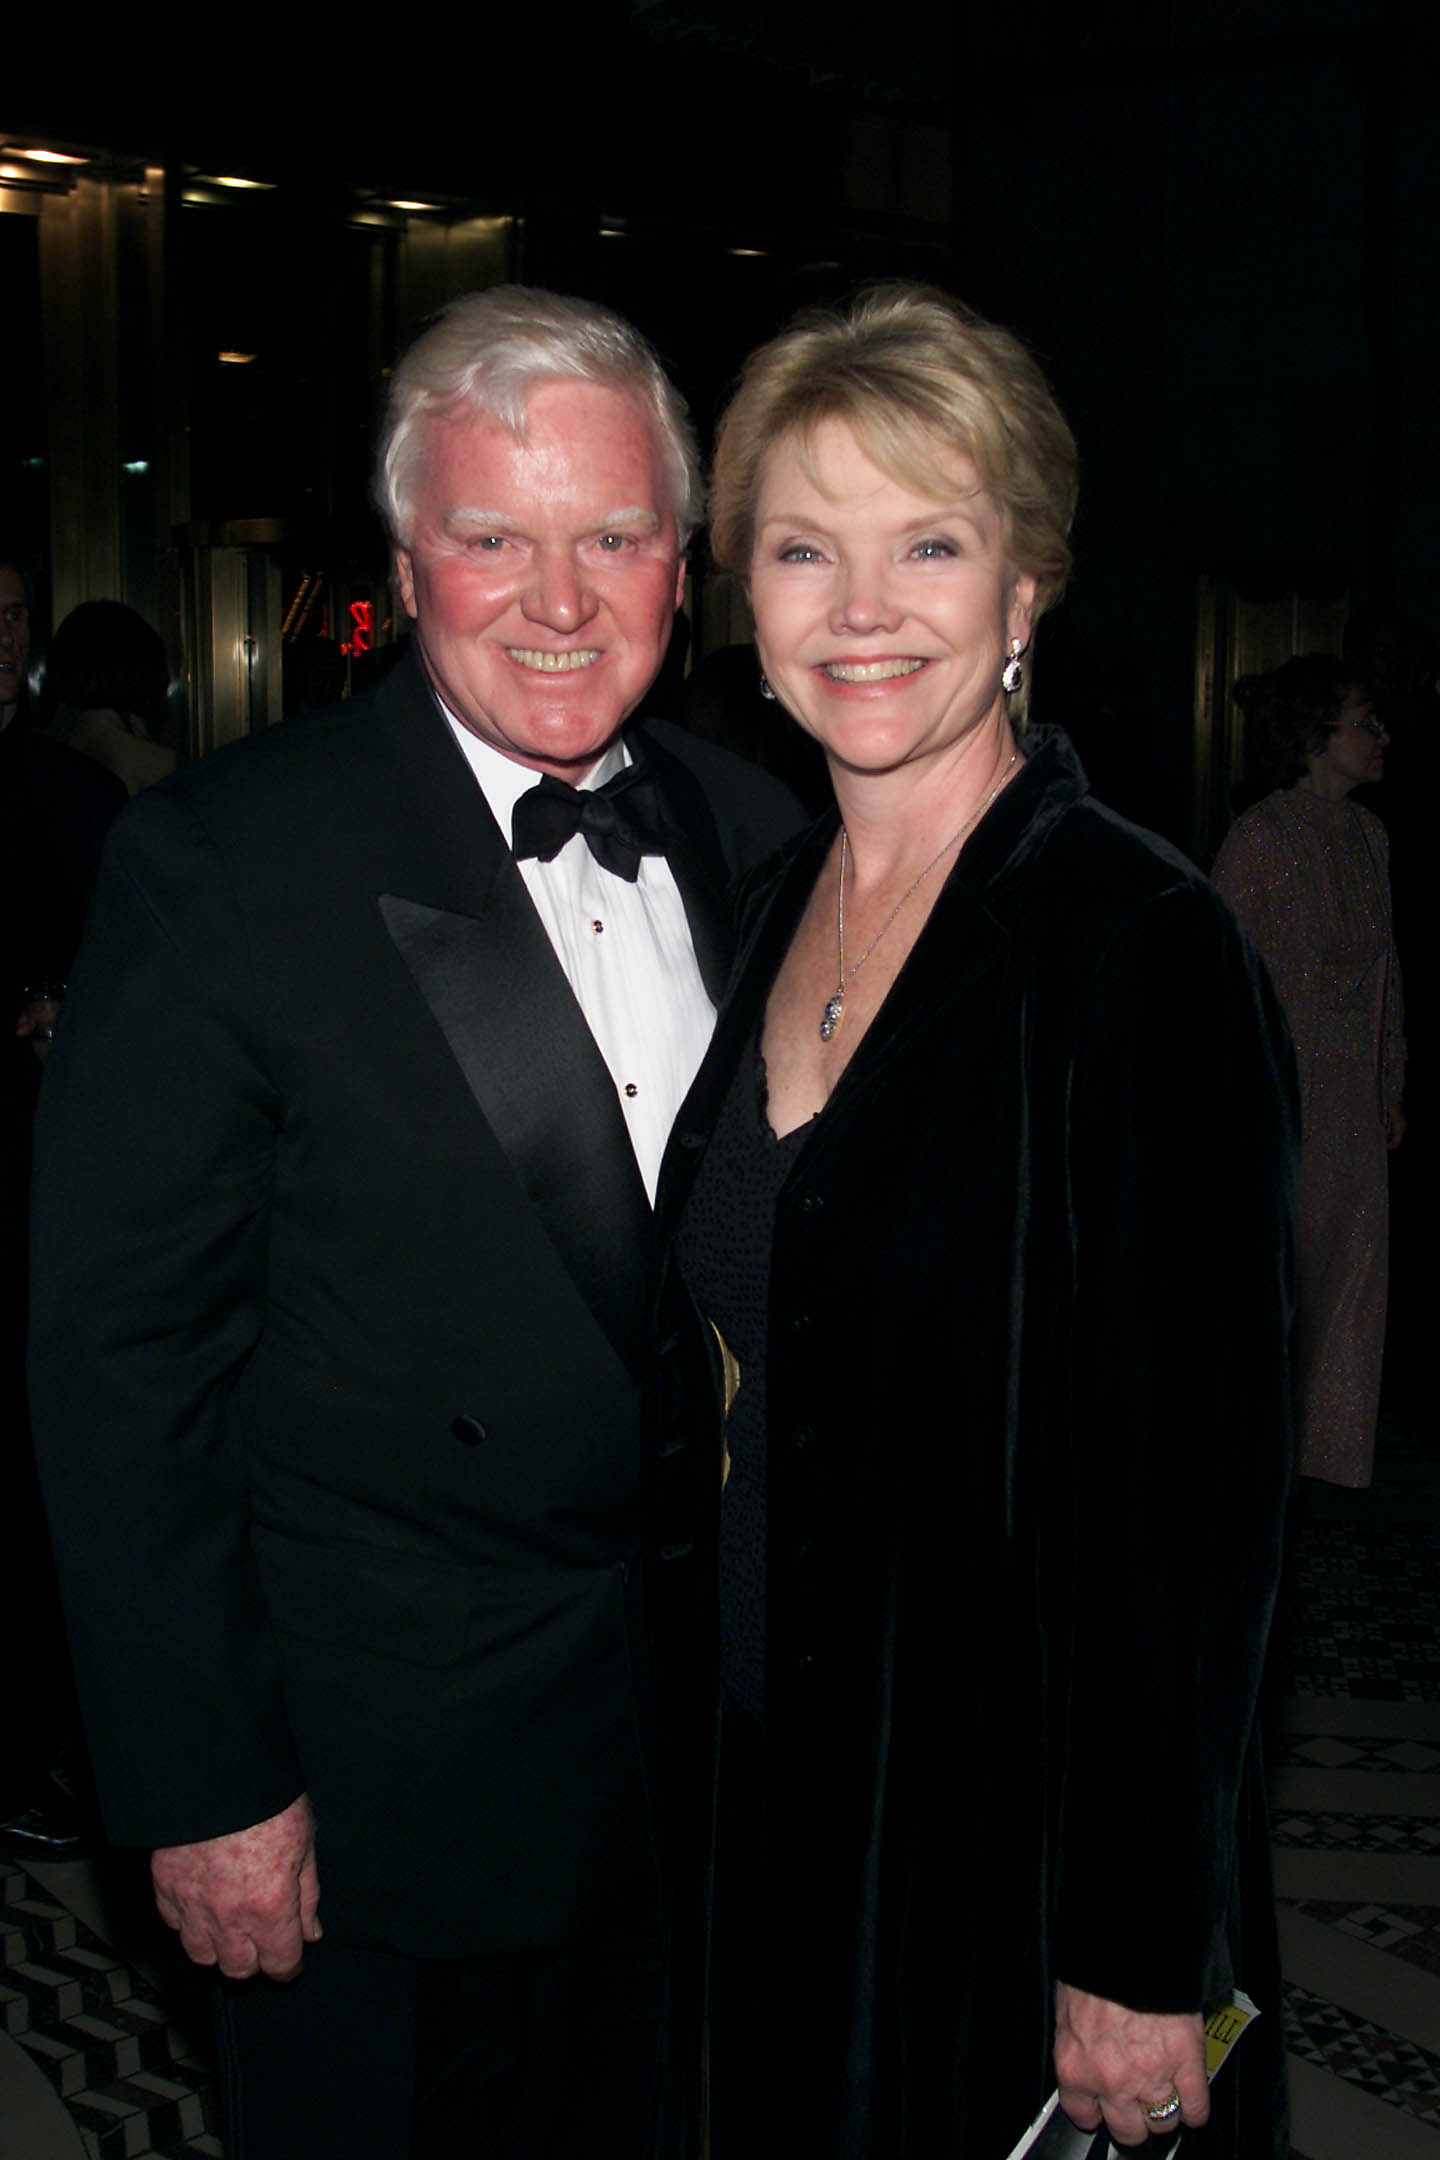 Brian Davies and Erika Slezak at the Roundabout Theatre Company's Annual Spring Gala in New York City on April 30, 2001 | Source: Getty Images